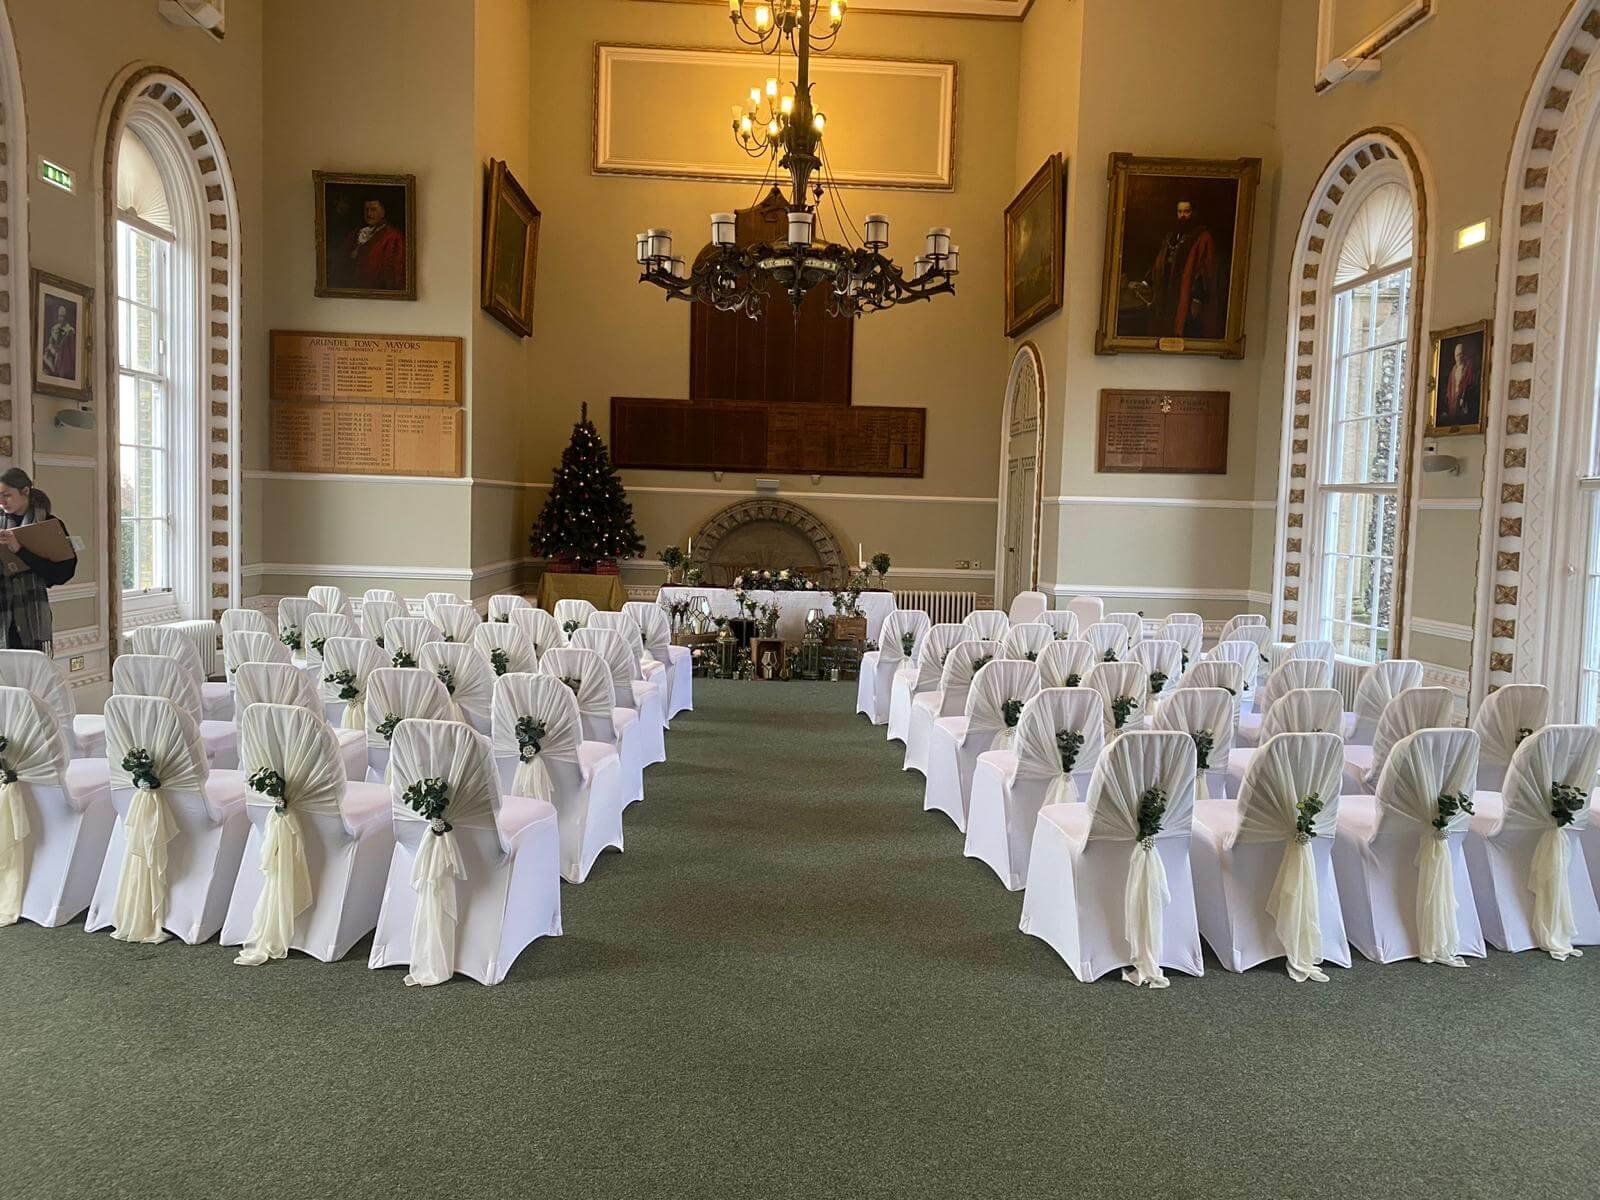 arundel_town_hall_ceremony_chair_covers_wedding_sussex_hire.jpg